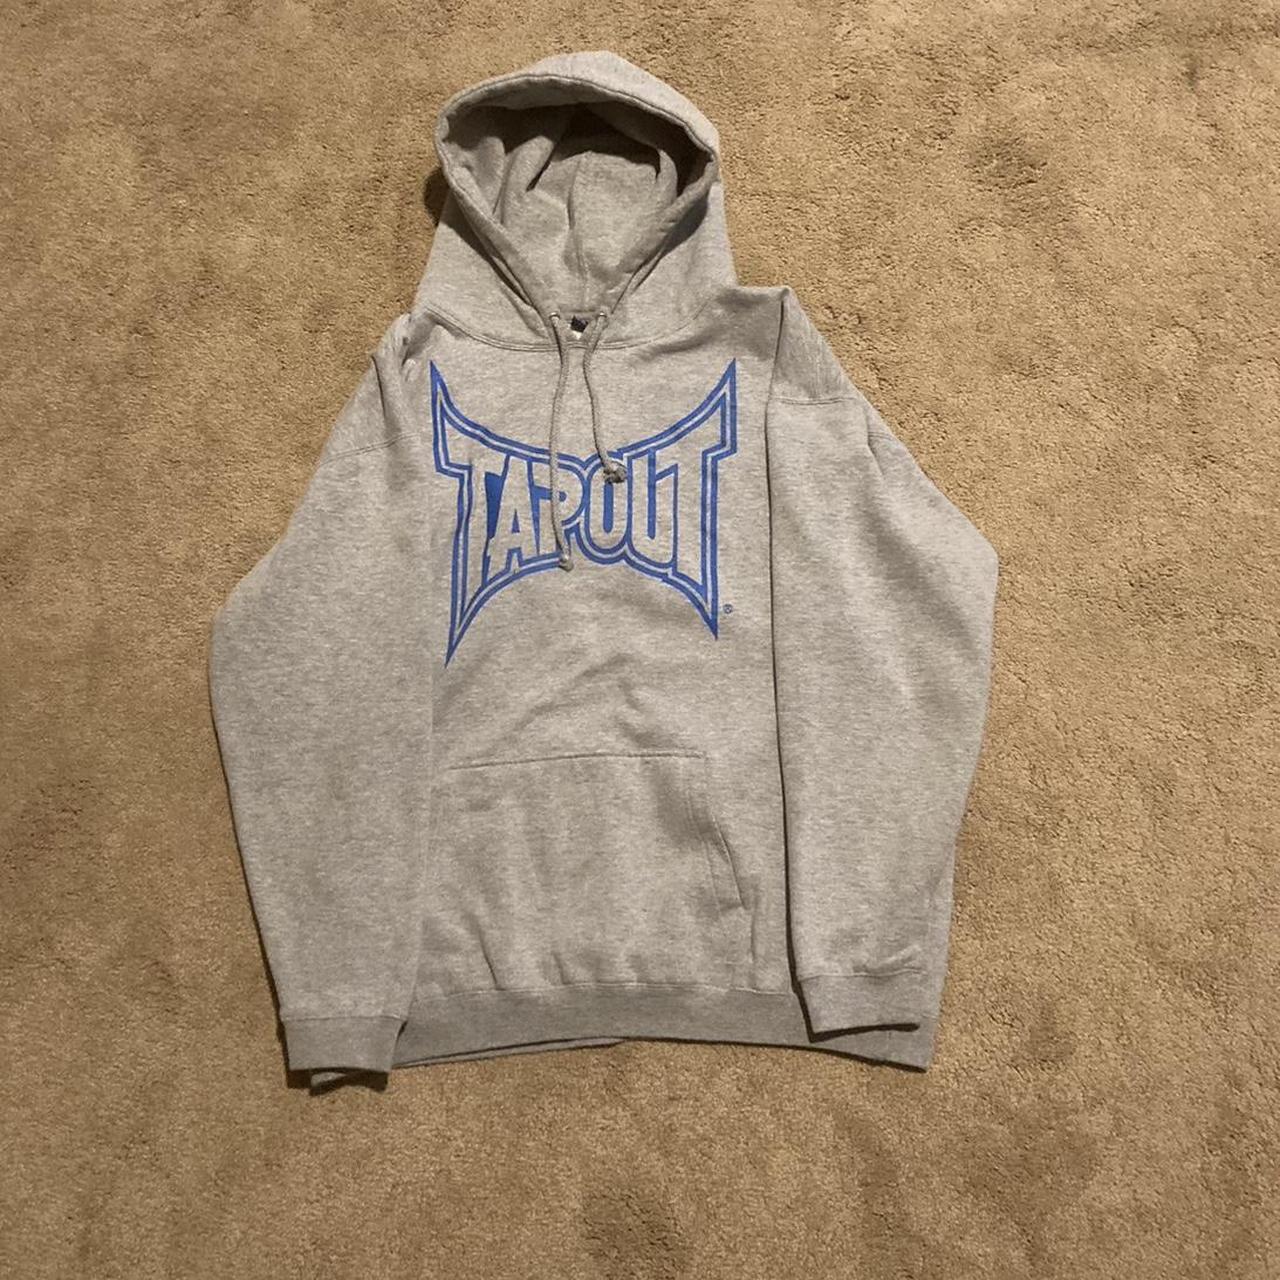 Super nice tap out gray and blue hoodie Grail tap... - Depop